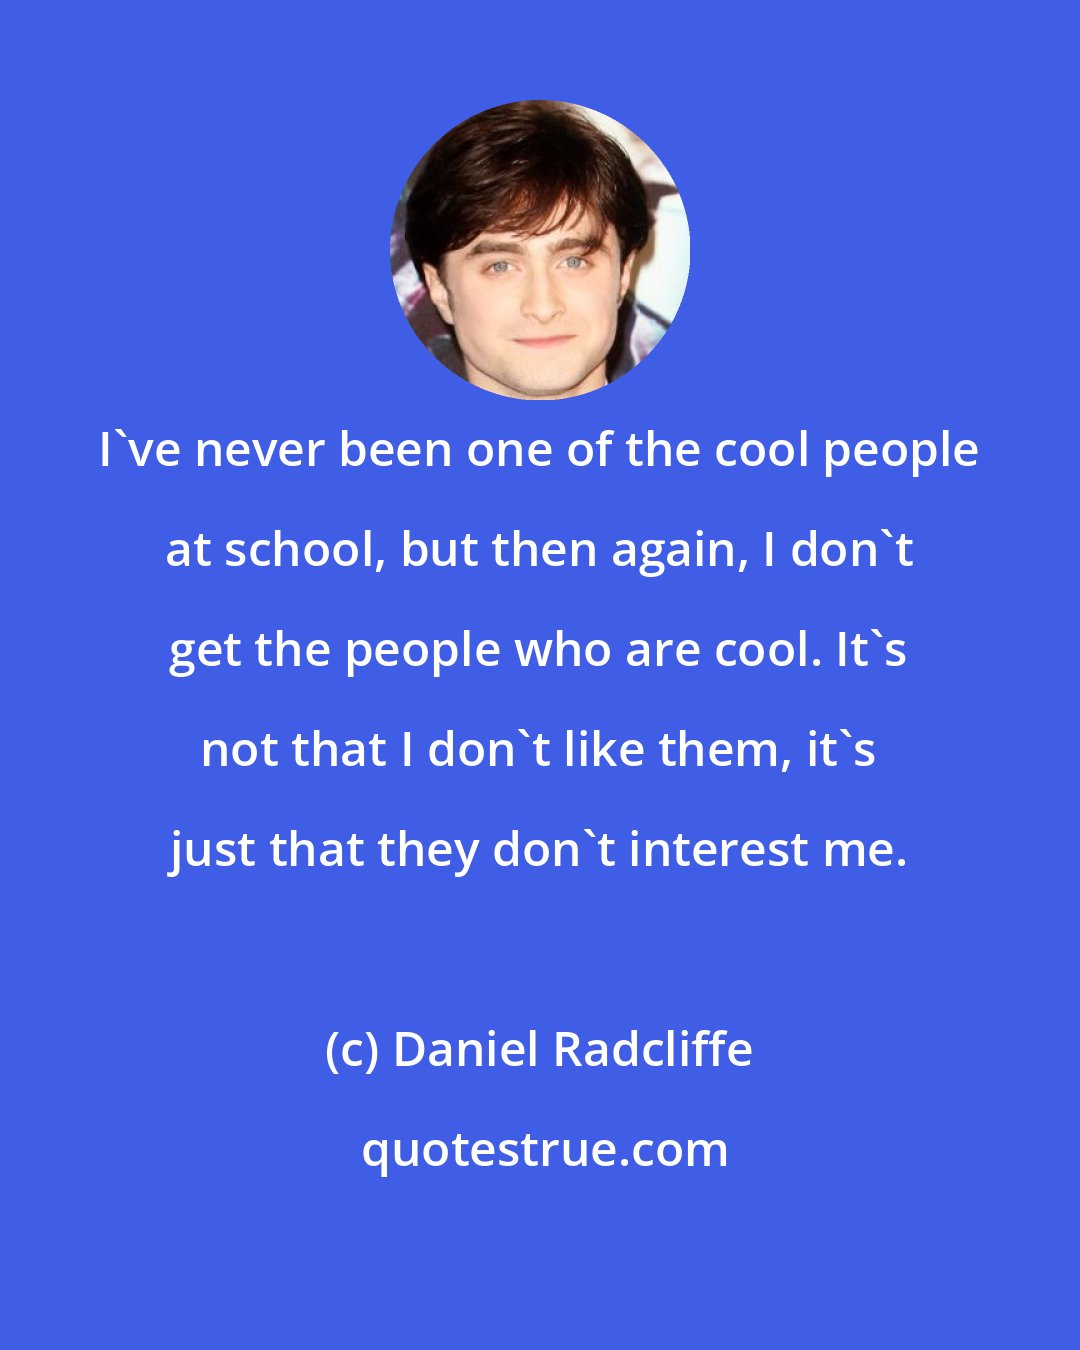 Daniel Radcliffe: I've never been one of the cool people at school, but then again, I don't get the people who are cool. It's not that I don't like them, it's just that they don't interest me.